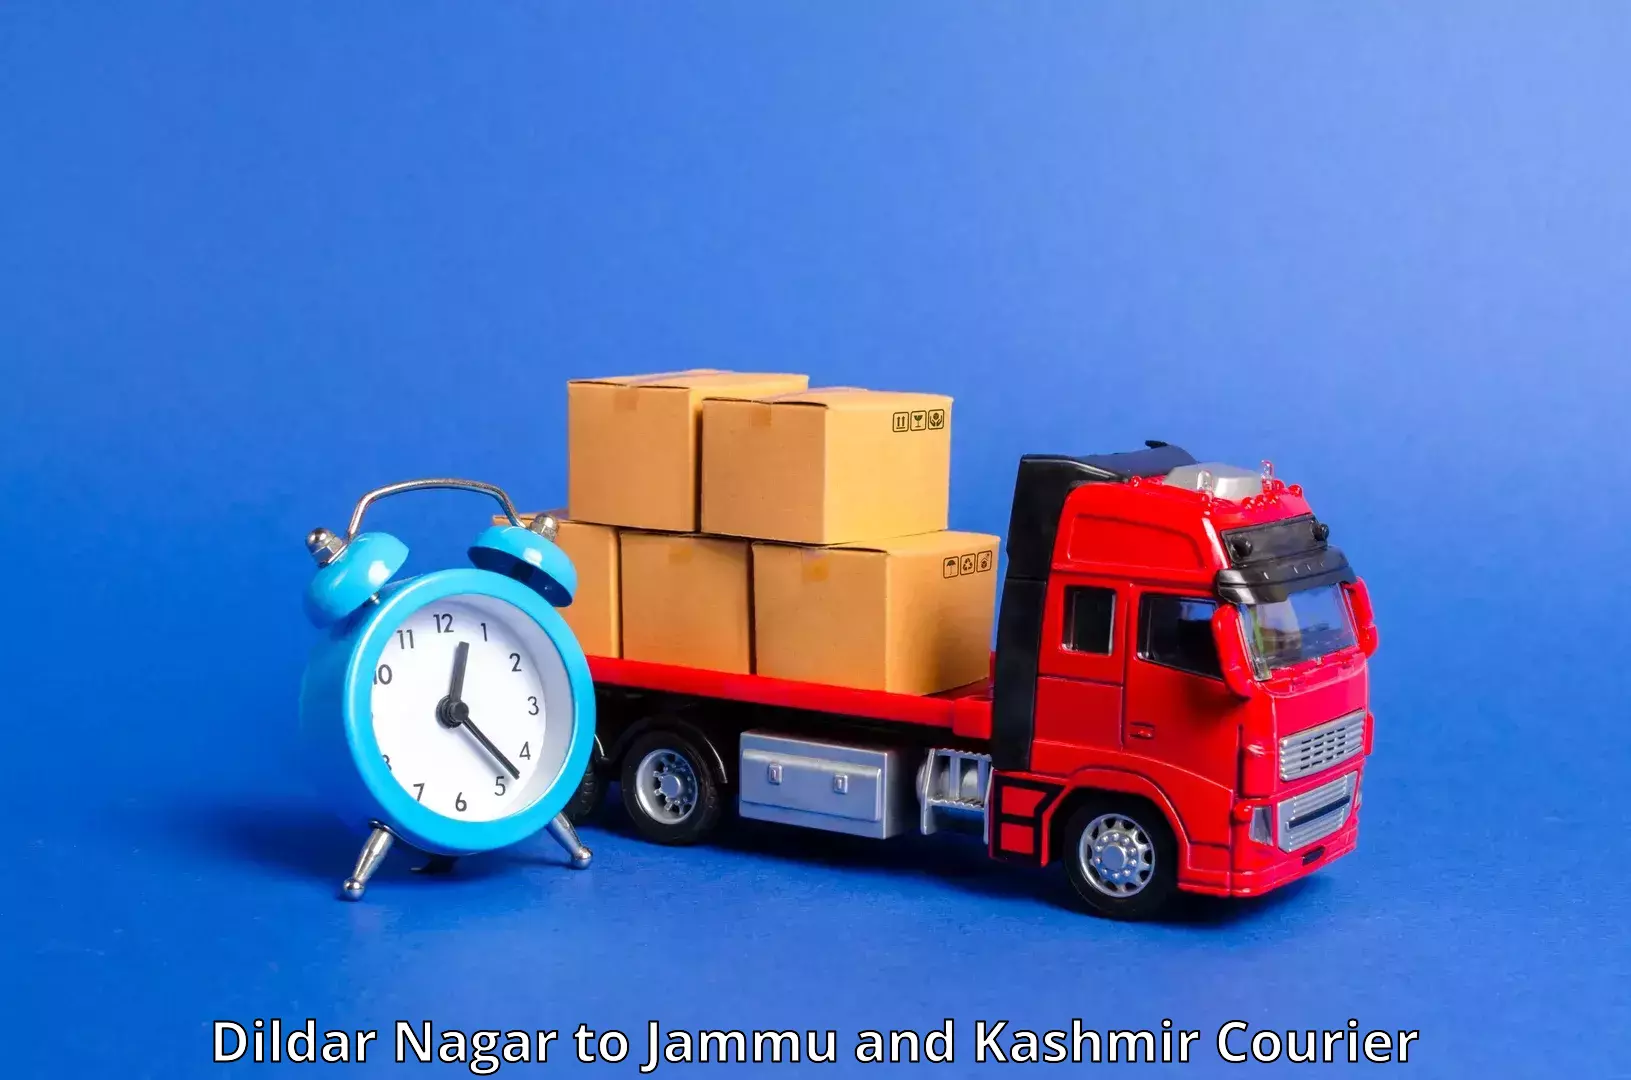 Fast delivery service in Dildar Nagar to Katra